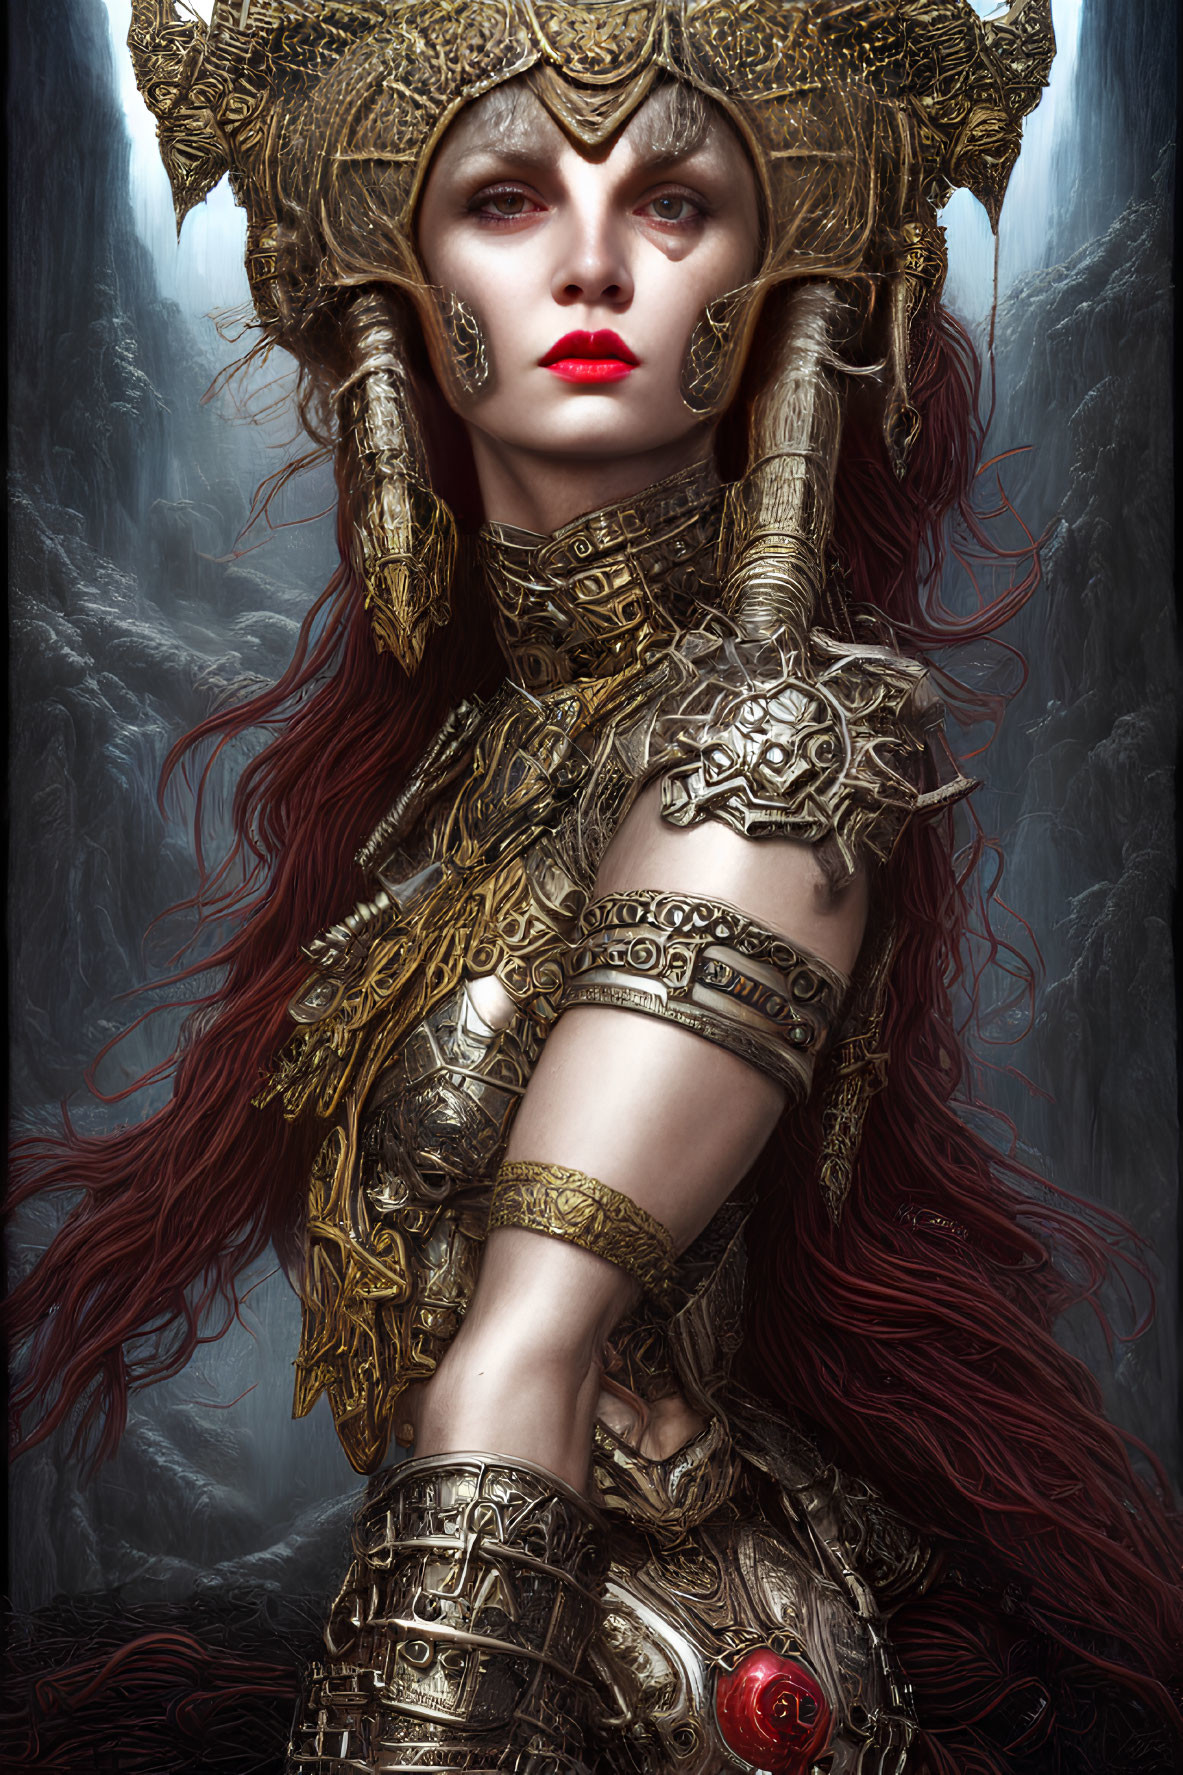 Female character in golden armor with red hair against misty backdrop